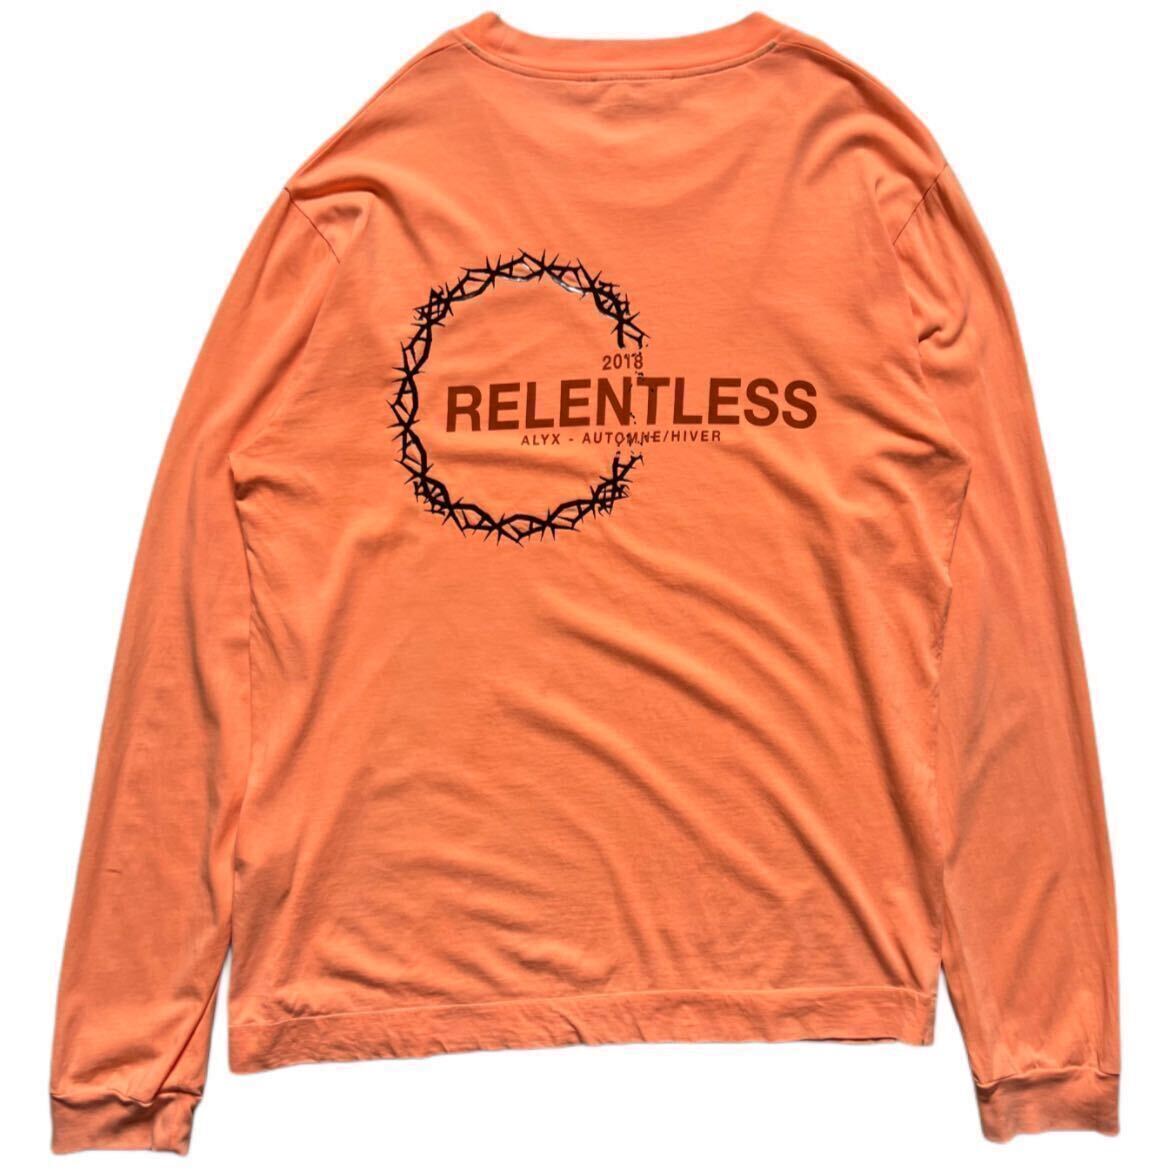 Rare 18AW 1017 ALYX 9SM “RELENTLESS” back logo long-sleeve tops archive collection Matthew Williams GIVENCY 2018AW sizeL 希少の画像1